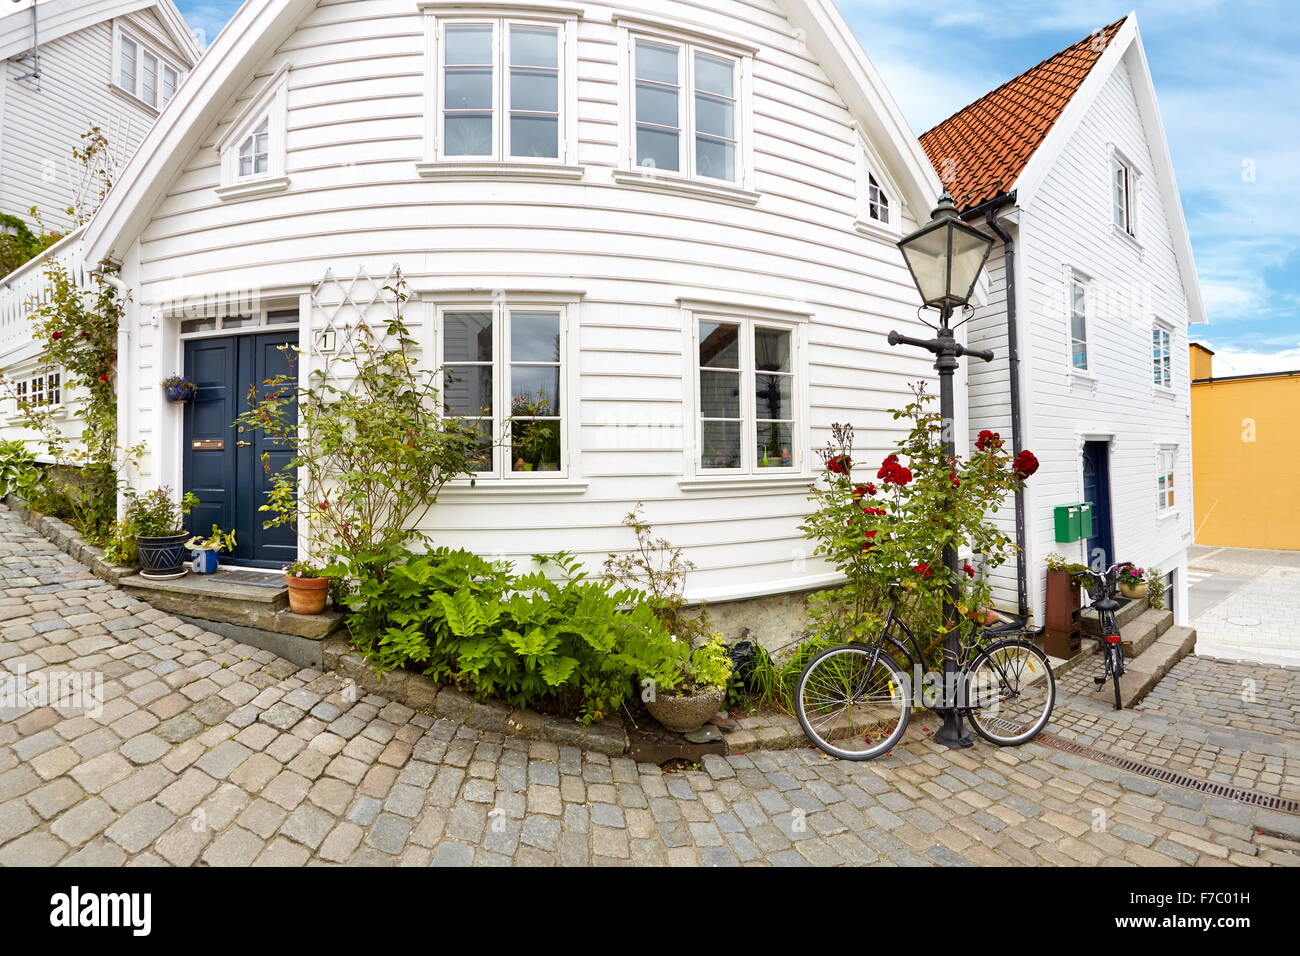 Traditional wooden houses in Stavanger, Norway Stock Photo